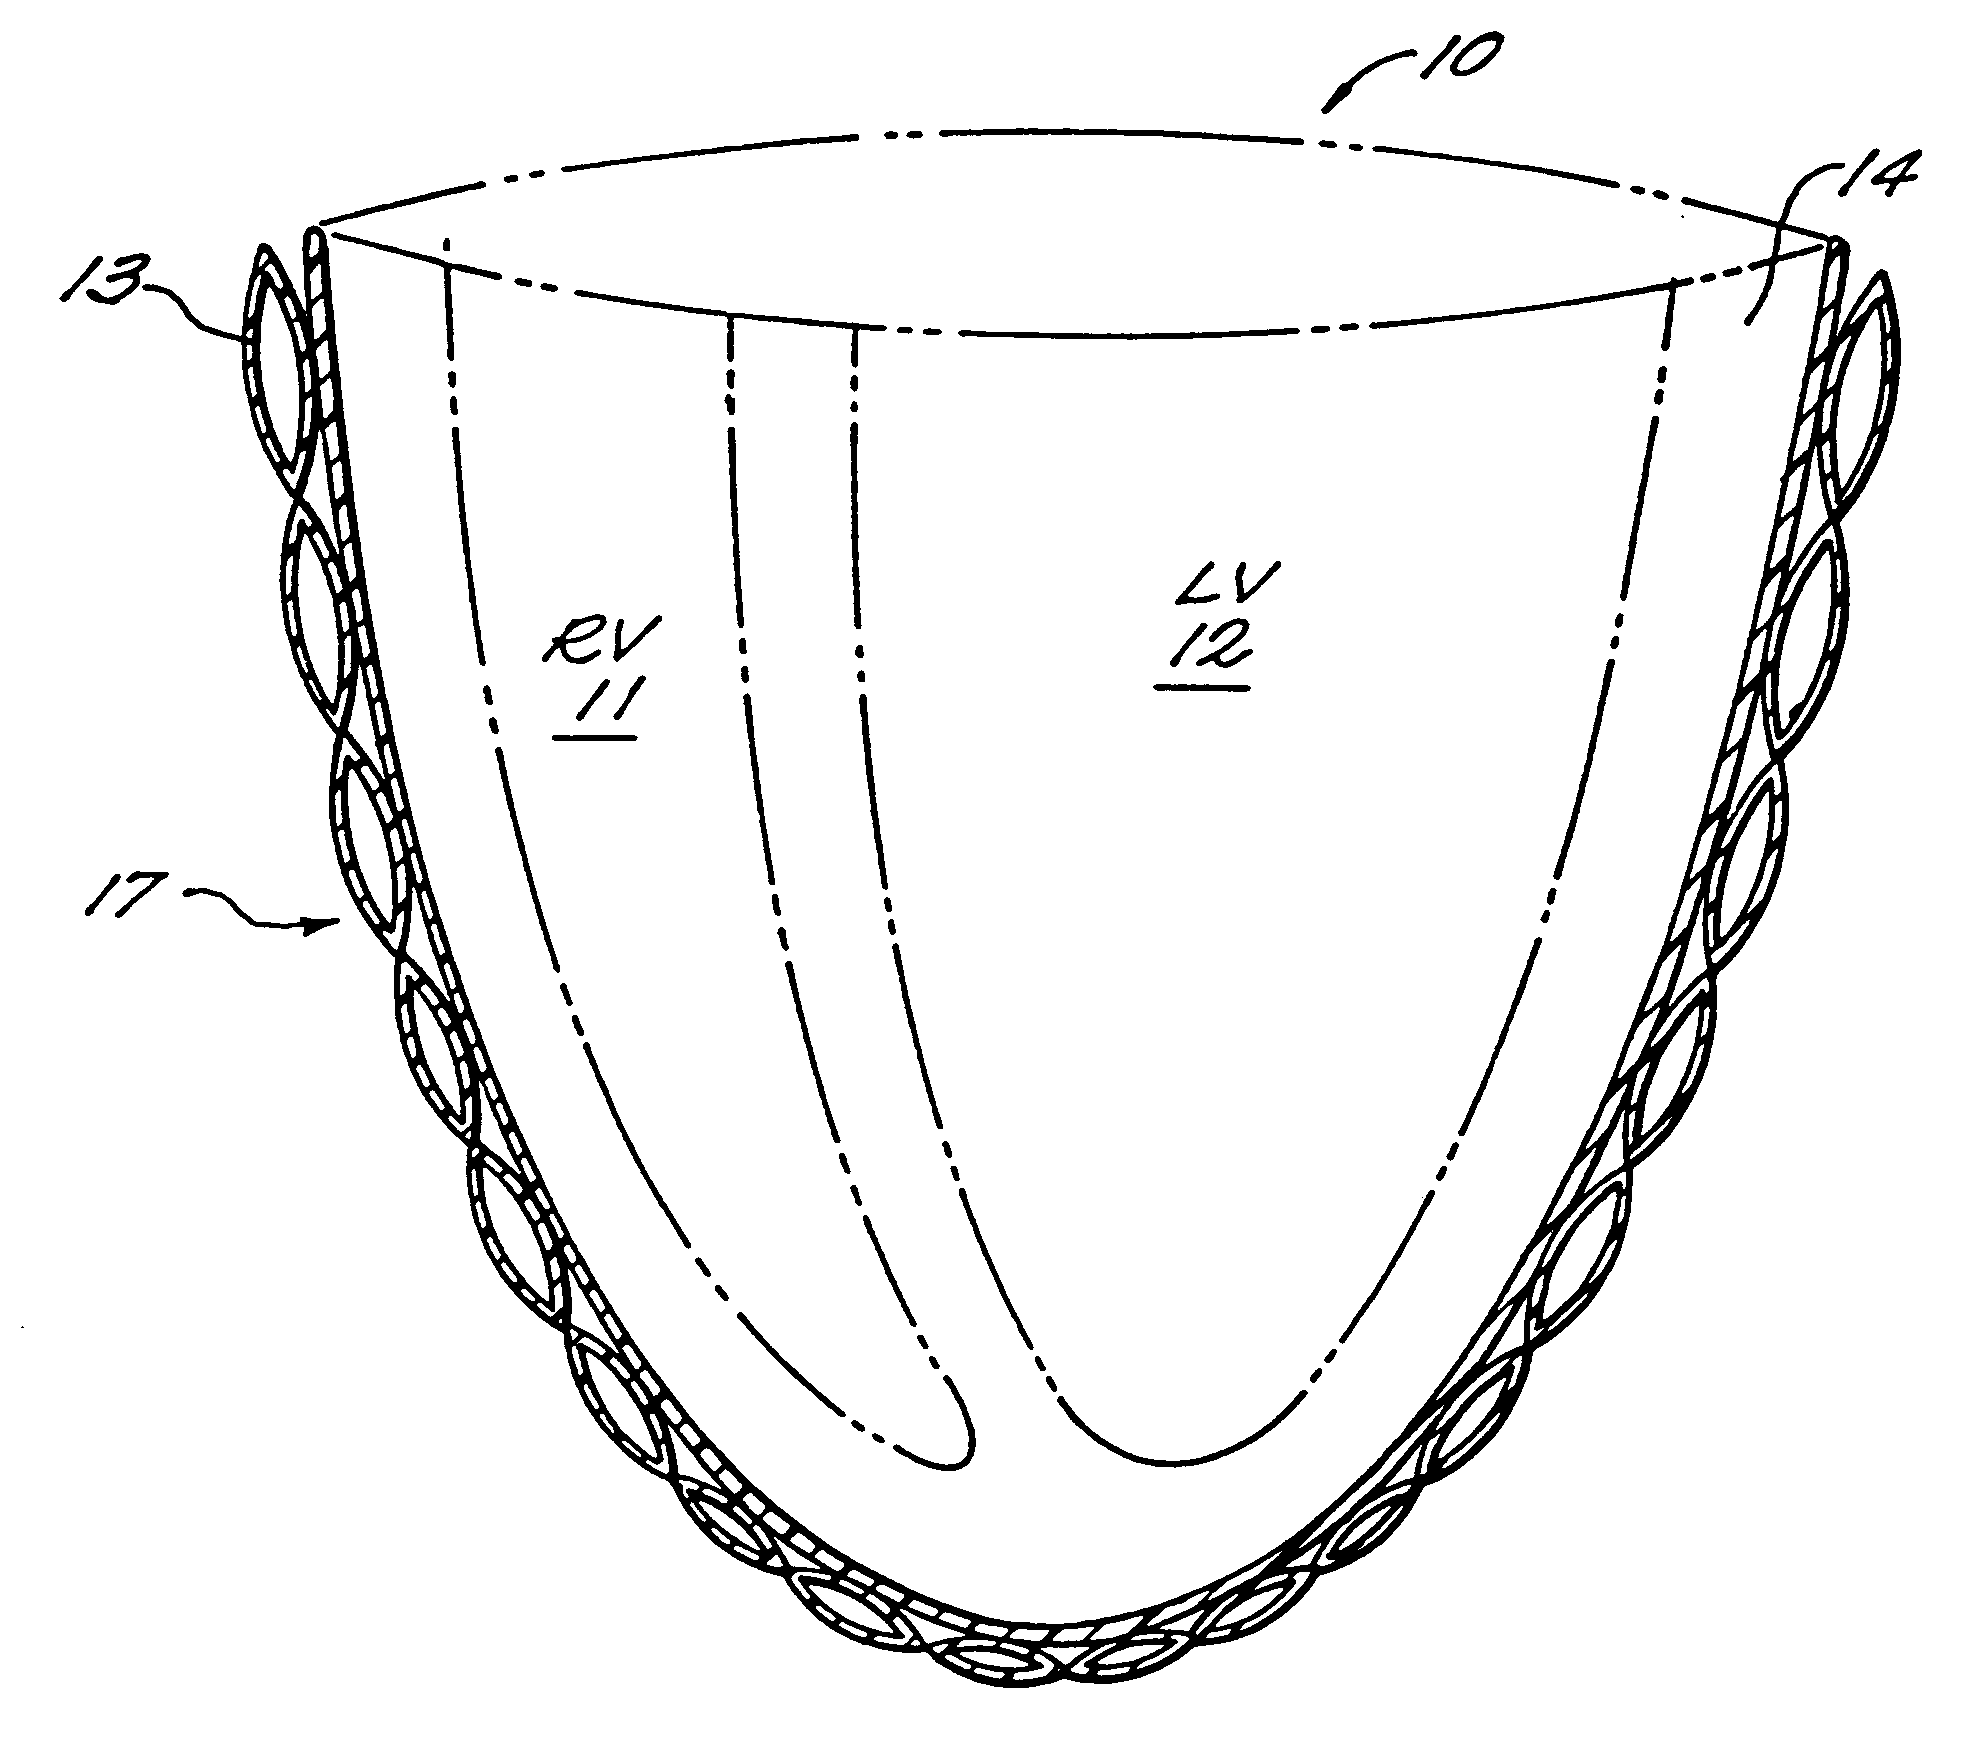 Passive girdle for heart ventricle for therapeutic aid to patients having ventricular dilatation